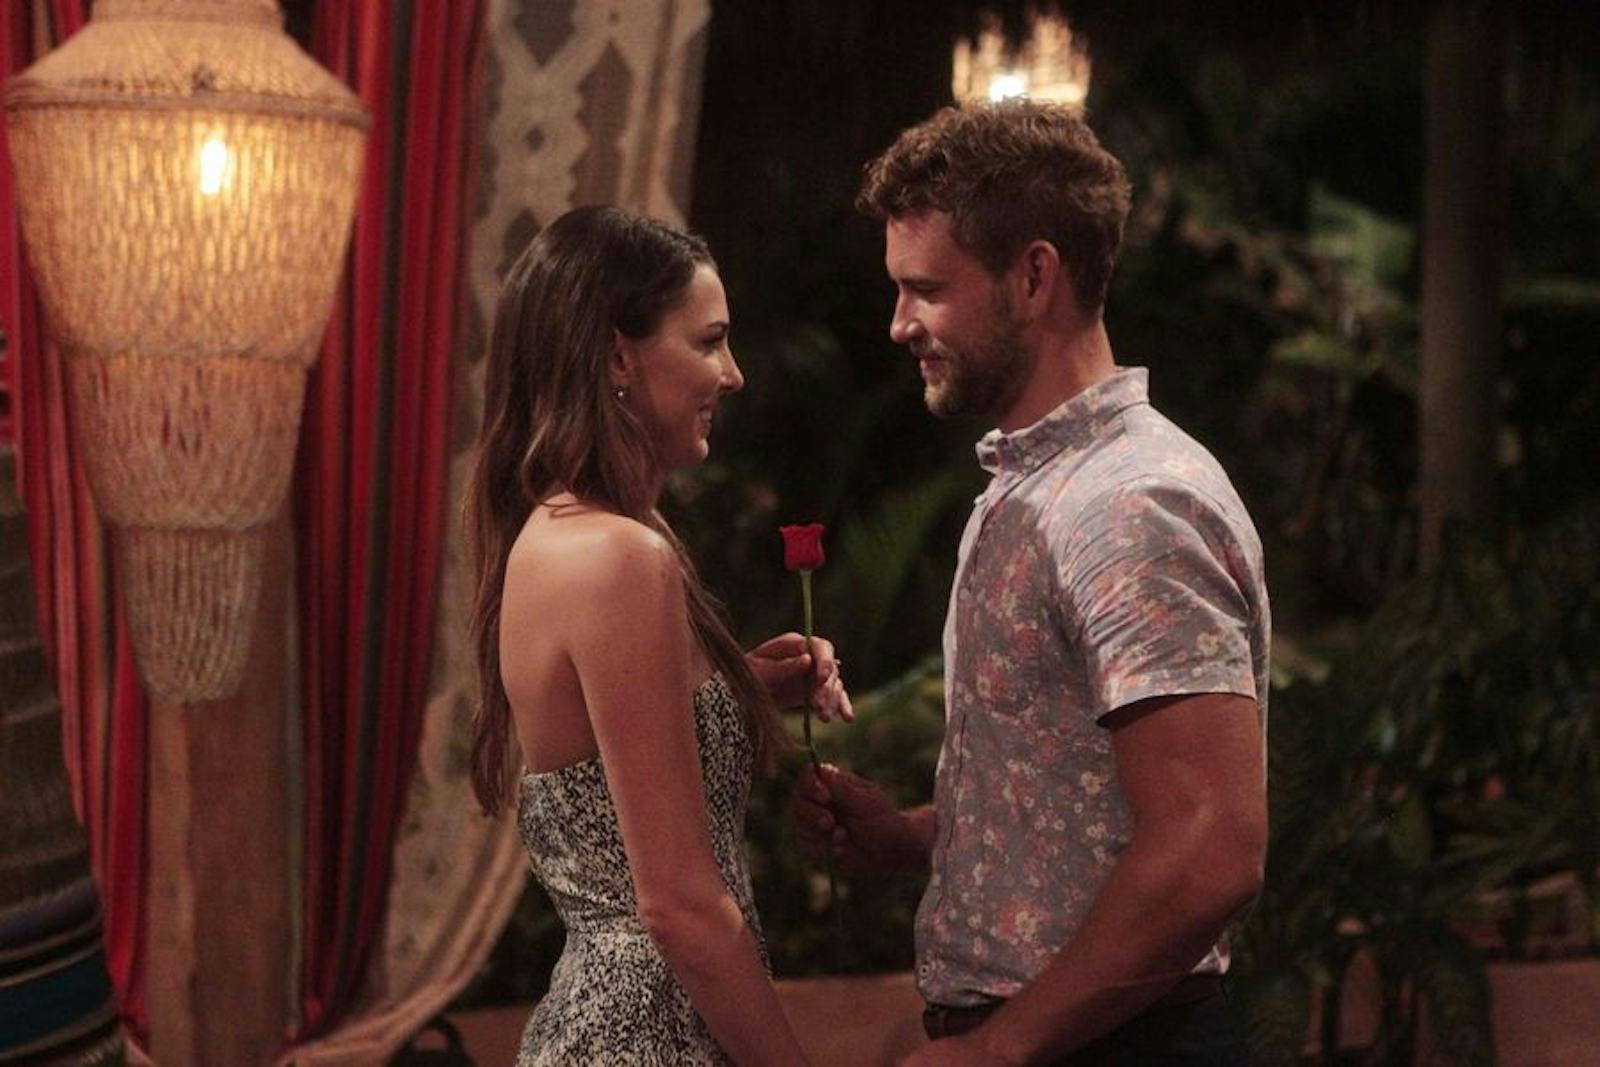 What Happened Between Nick & Jen On 'Bachelor In Paradise'? Their